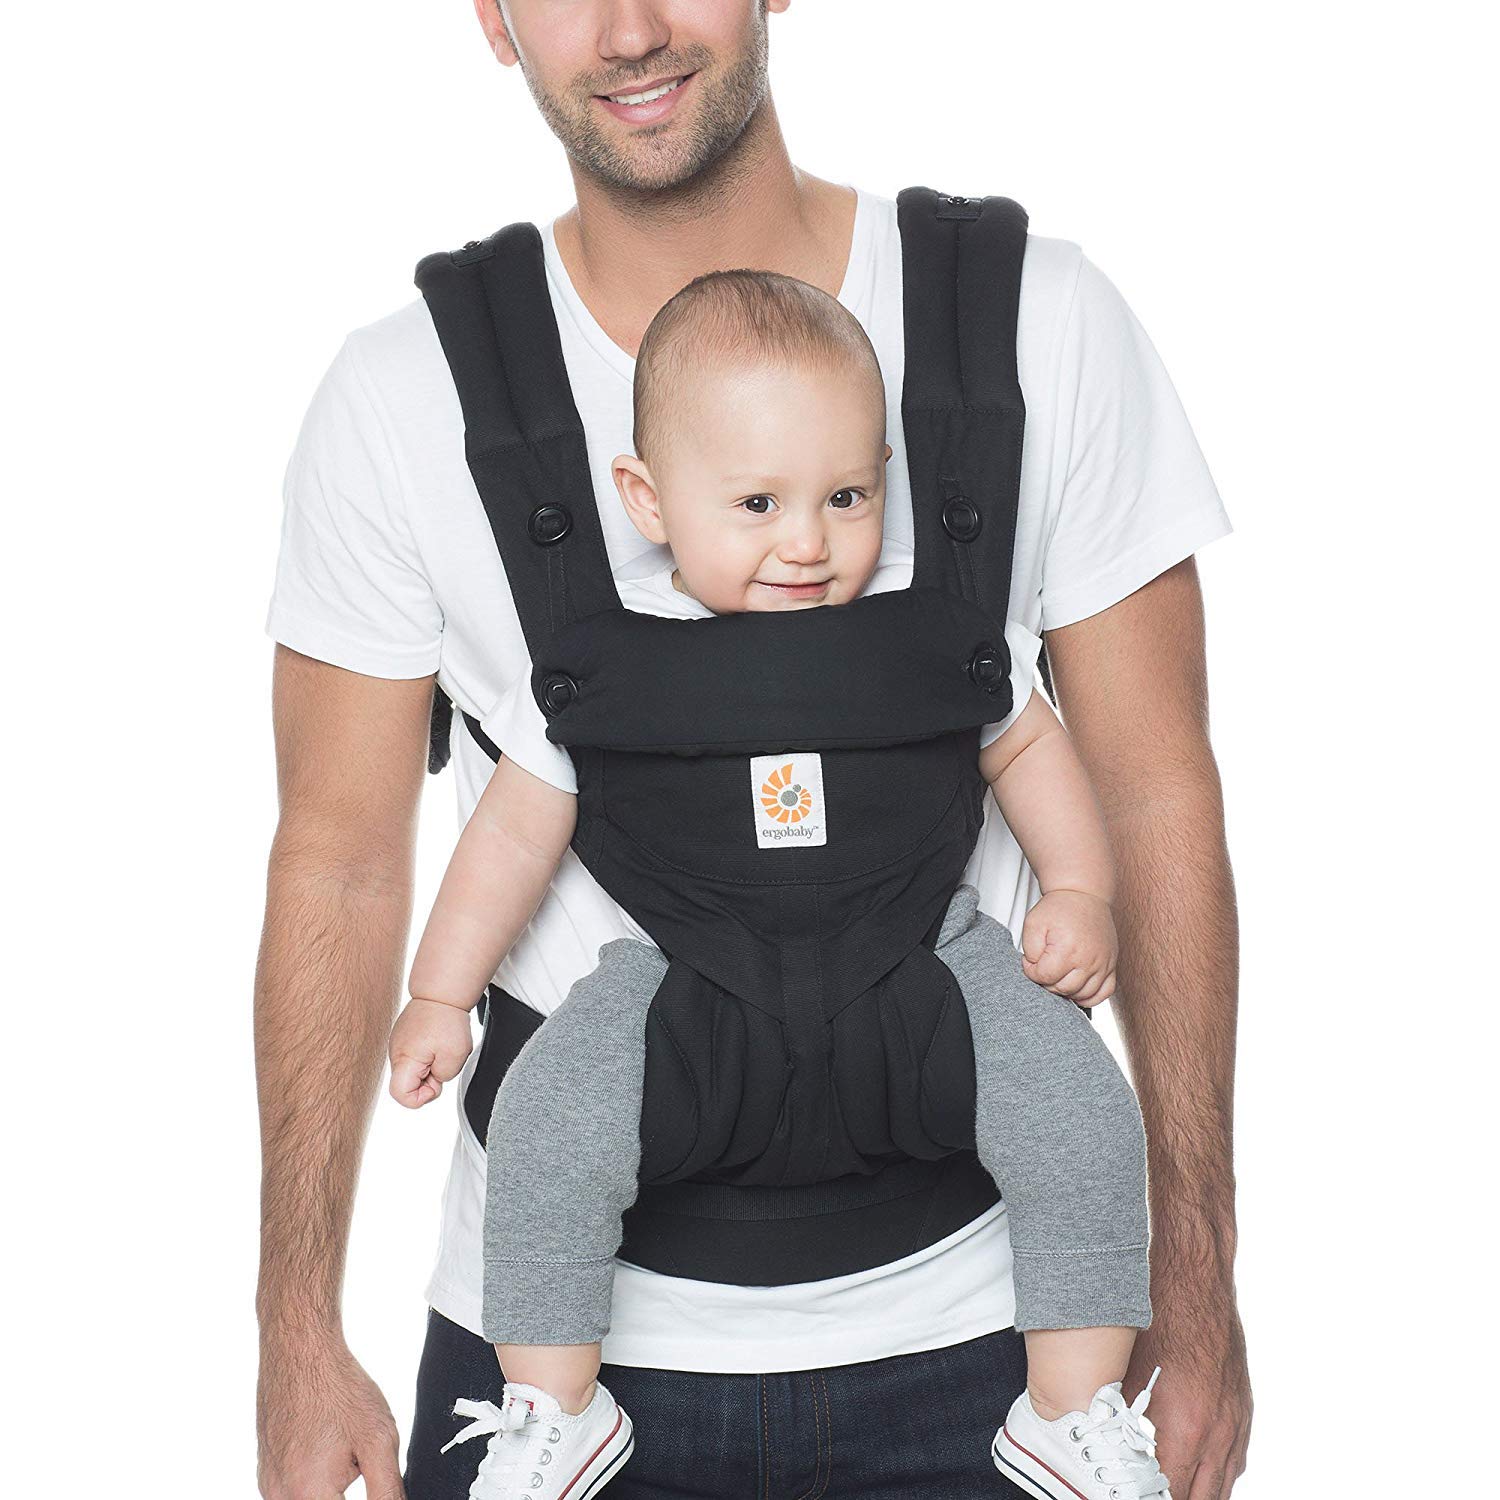 Ergobaby 360 All-Position Baby Carrier with Lumbar Support (12-45 Pounds), Pure Black, Premium Cotton